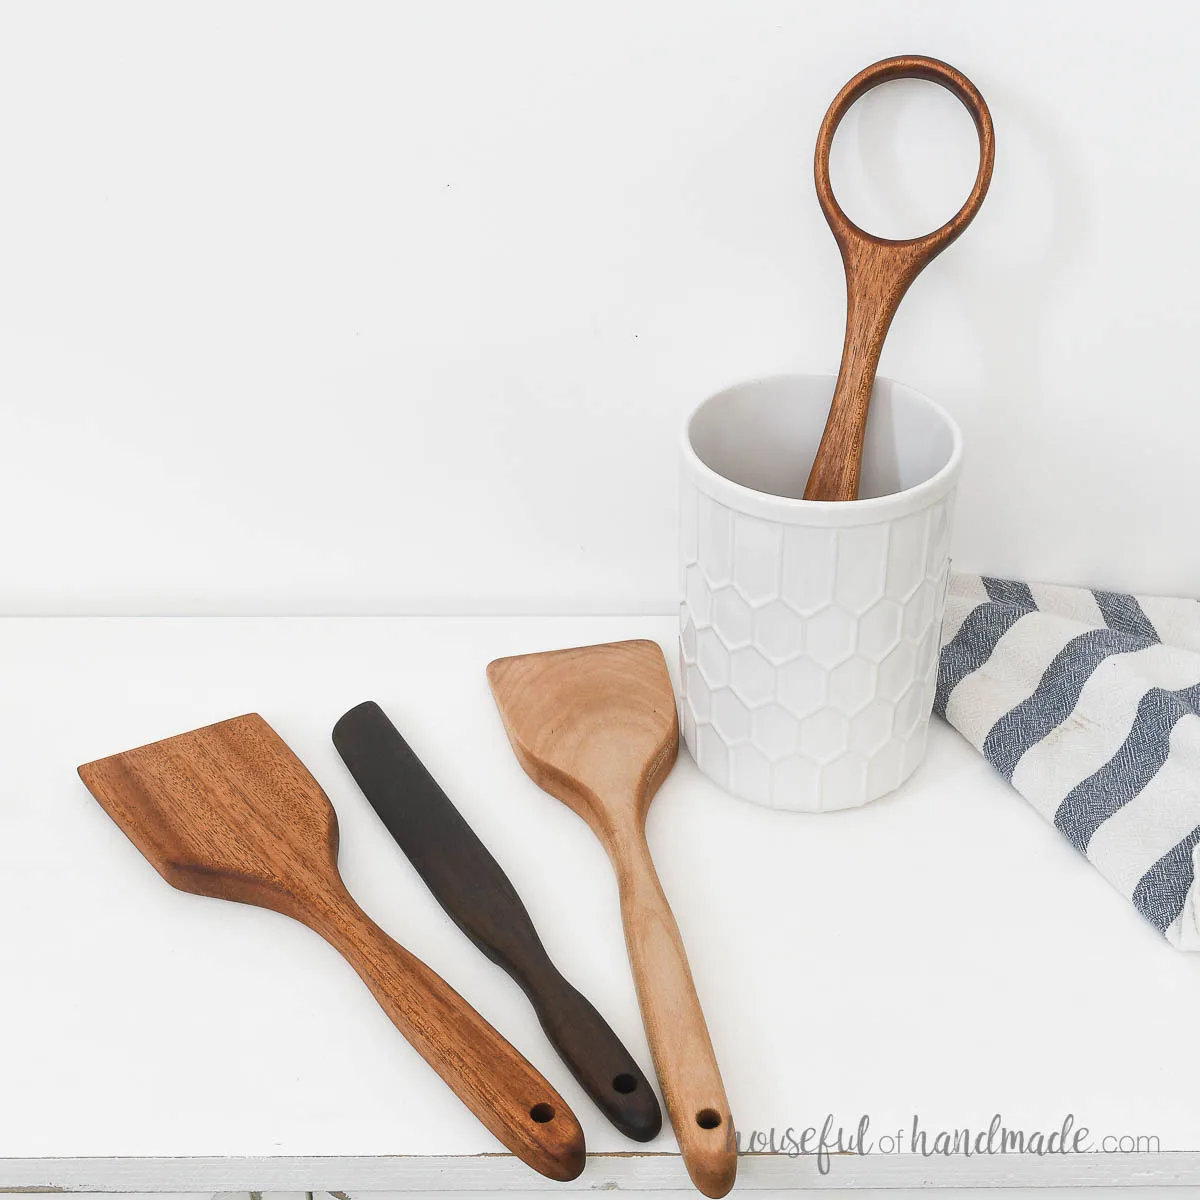 Four different types of DIY wood utensils from maple, mahogany and walnut wood. 